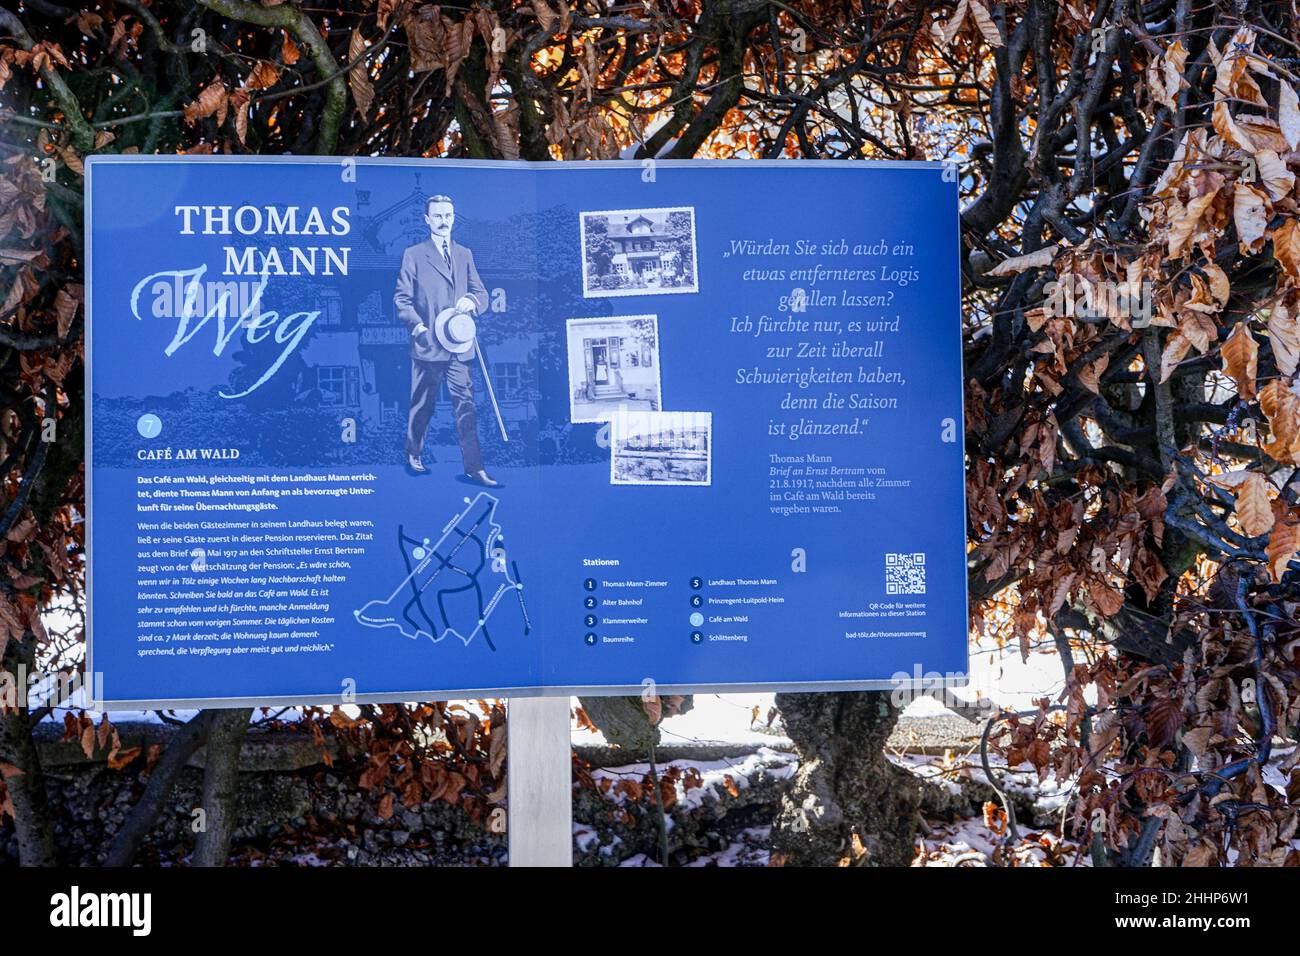 The Thomas Mann Trail shows at stations panels in book form with pictures and texts which experiences connect Thomas Mann and his family with Bad Tölz. Stock Photo